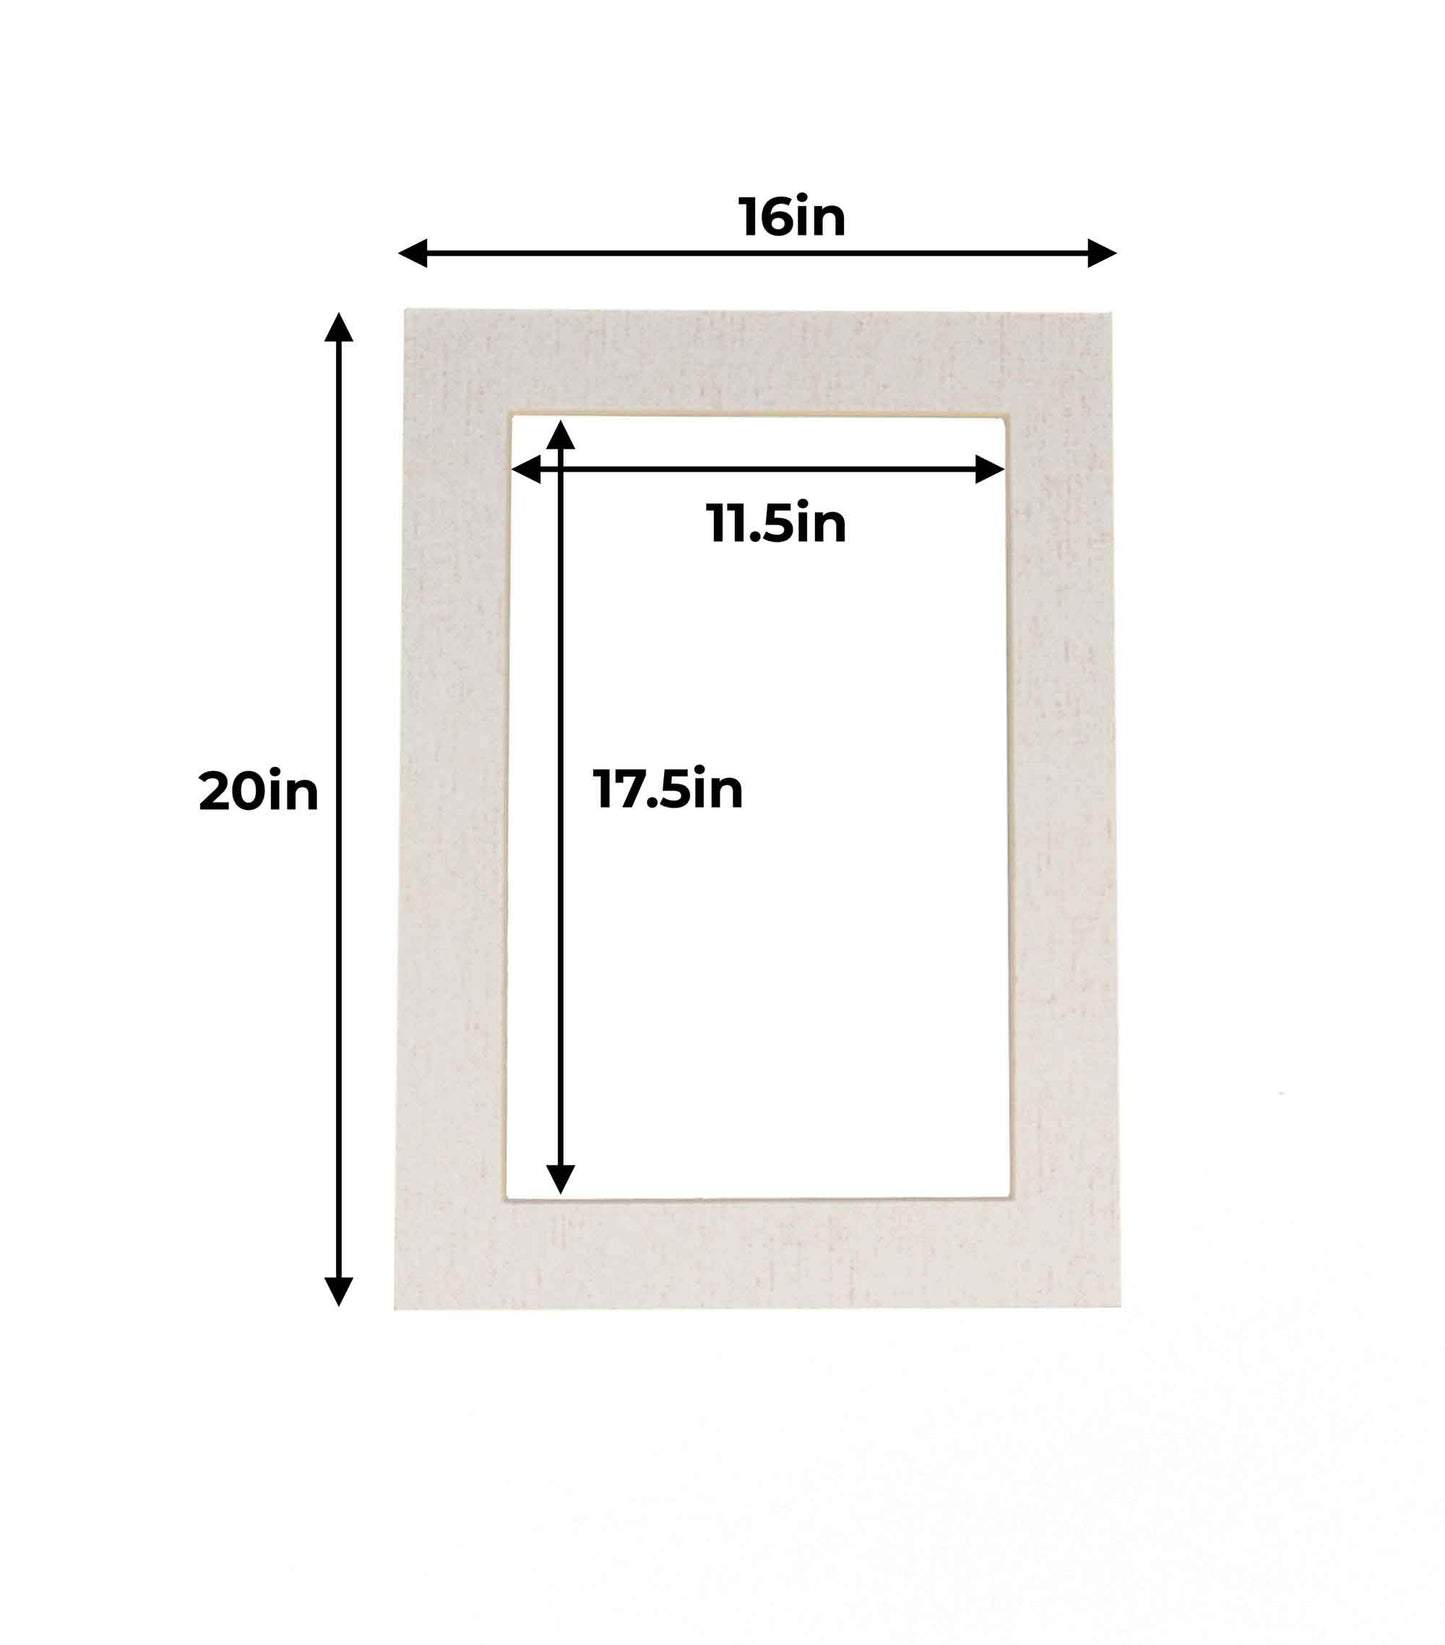 Pack of 10 White Linen Canvas Precut Acid-Free Matboard Set with Clear Bags & Backings